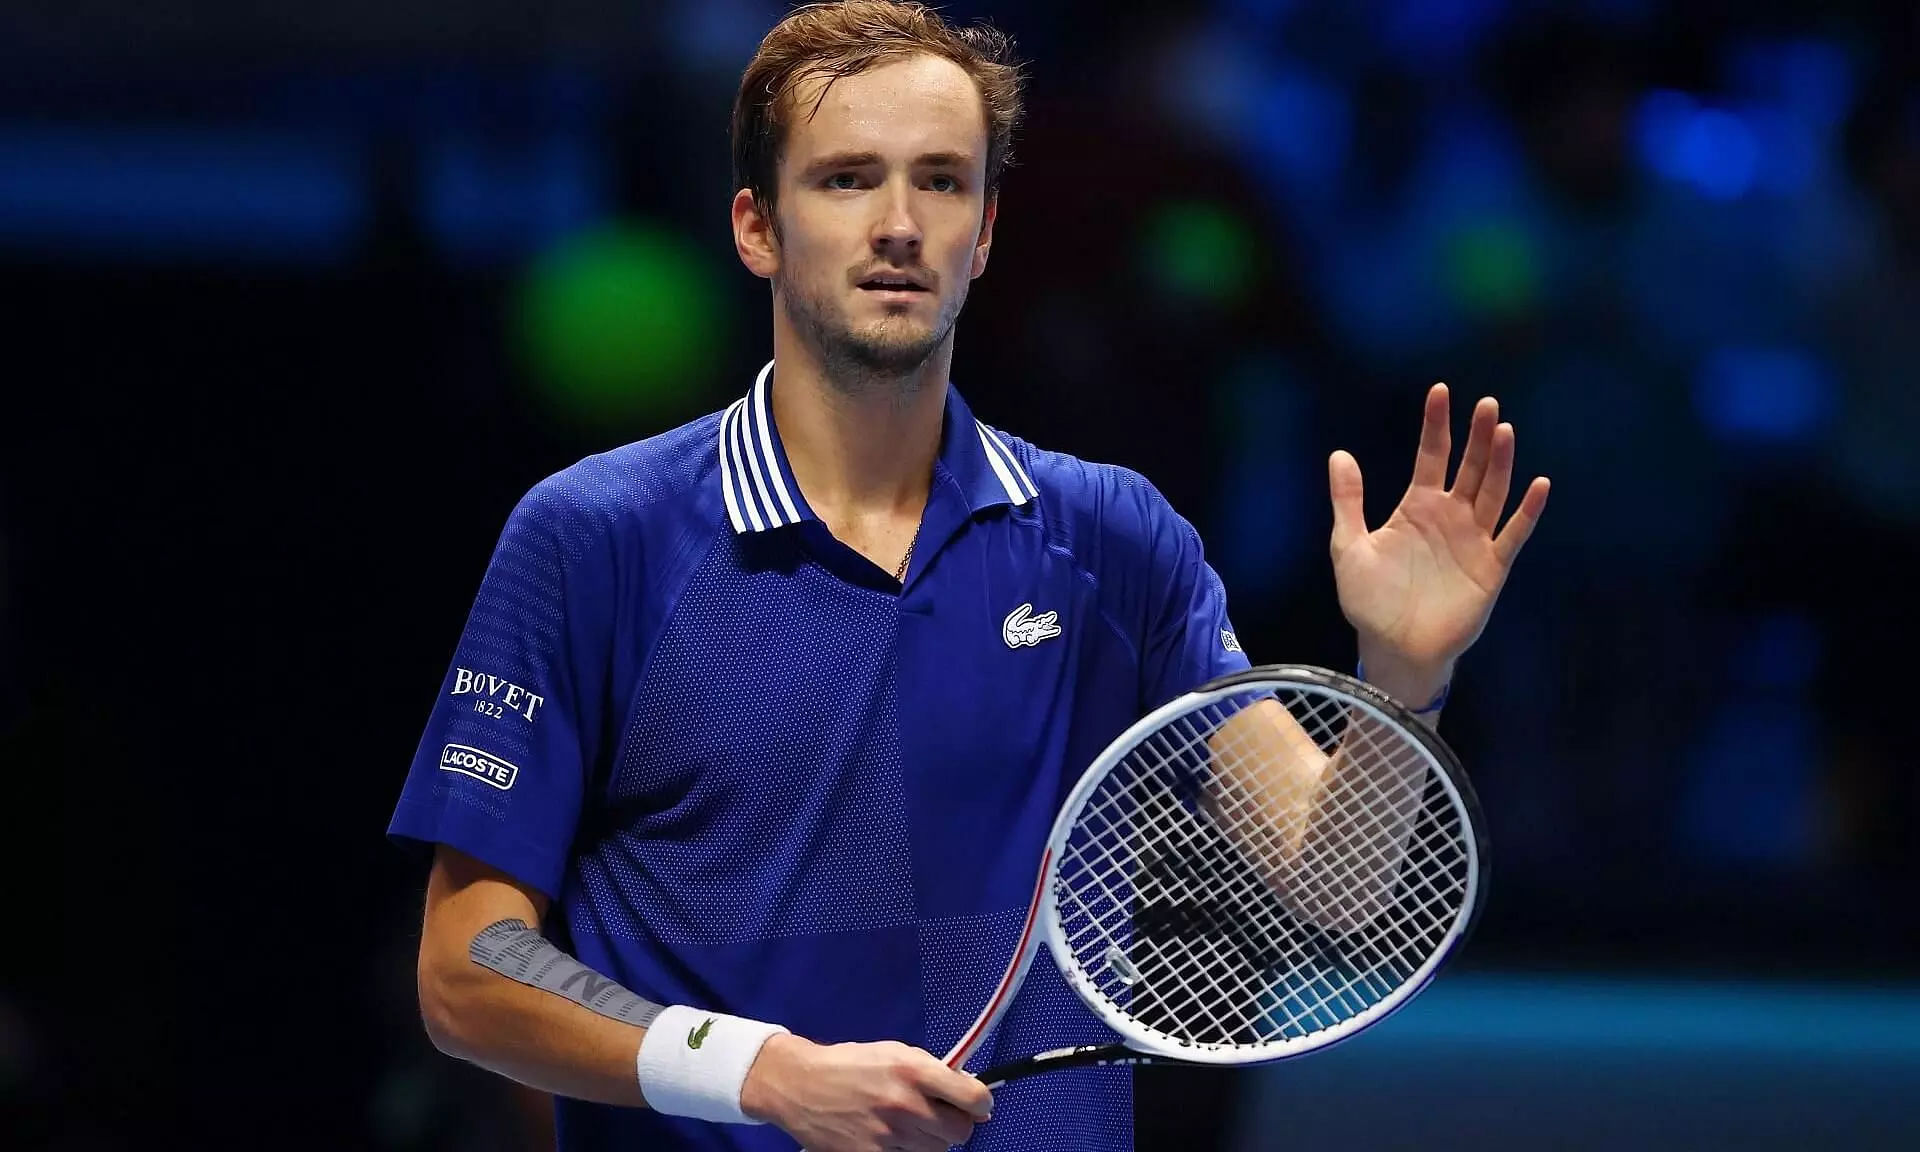 Russian Medvedev Makes History, Reaches No. 1 In ATP Rankings